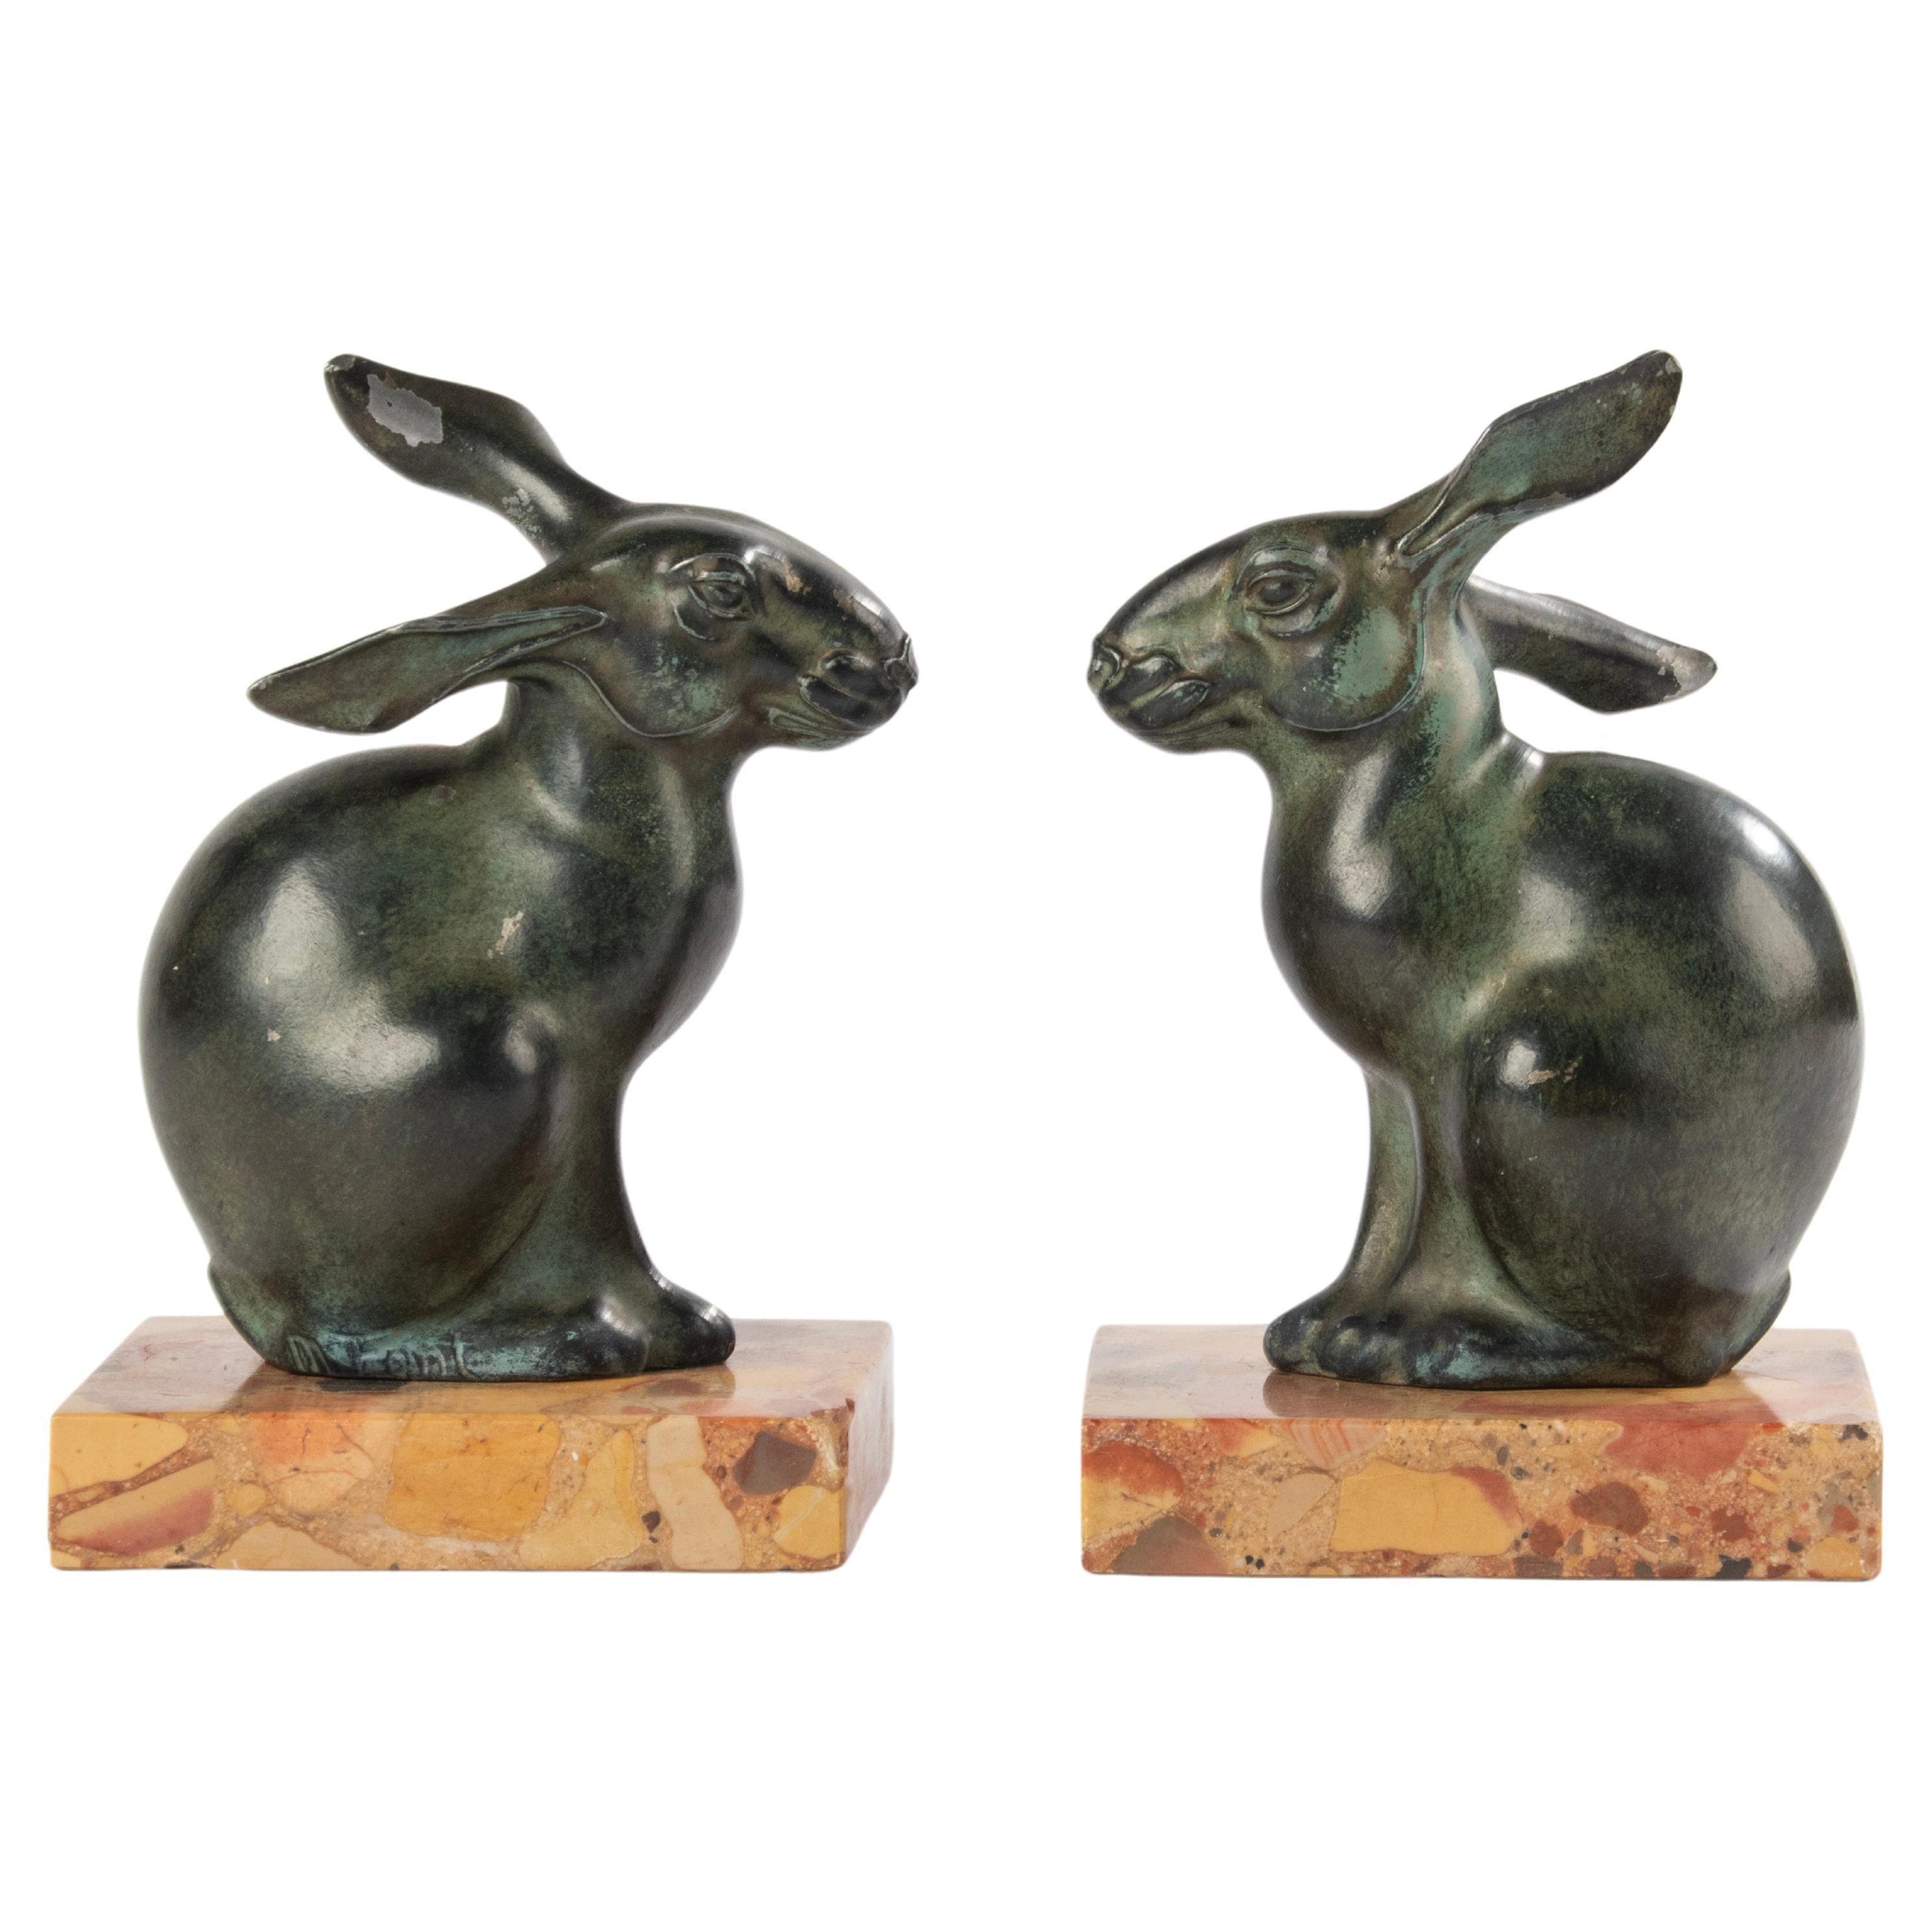 Art Deco Period Green Patinated Spelter Rabbits Bookends by Maurice Font